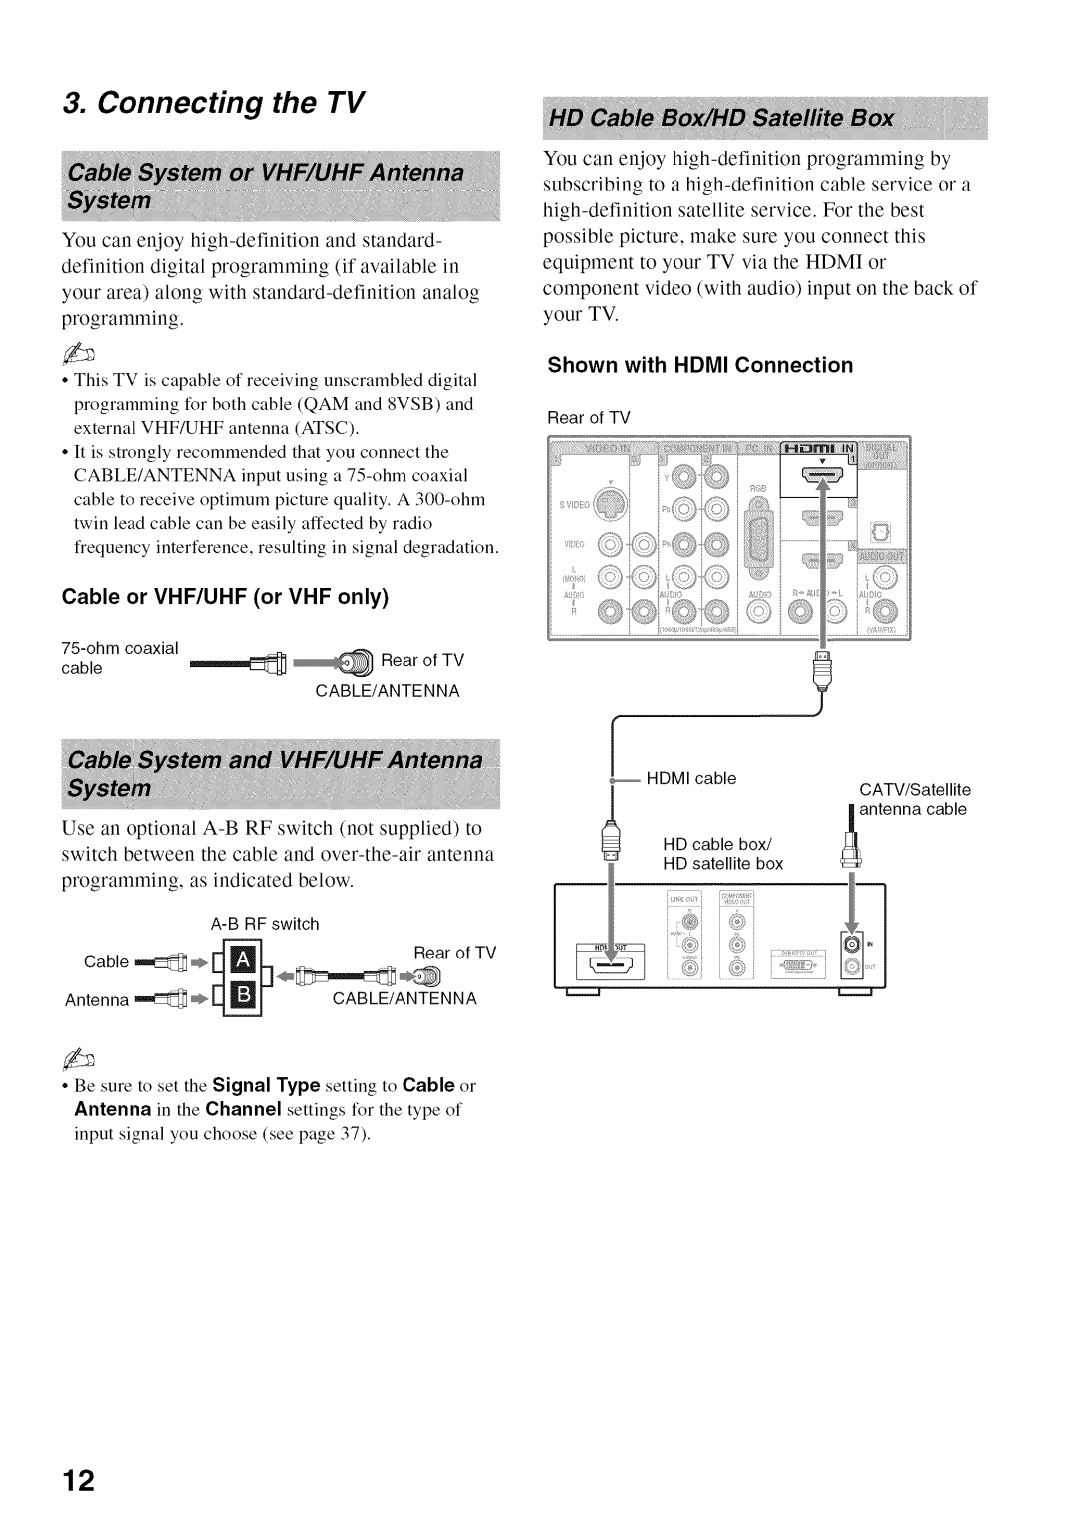 Sony KDL52V4100 operating instructions Connecting the TV, Shown with HDMI Connection, Cable or VHF/UHF or VHF only 